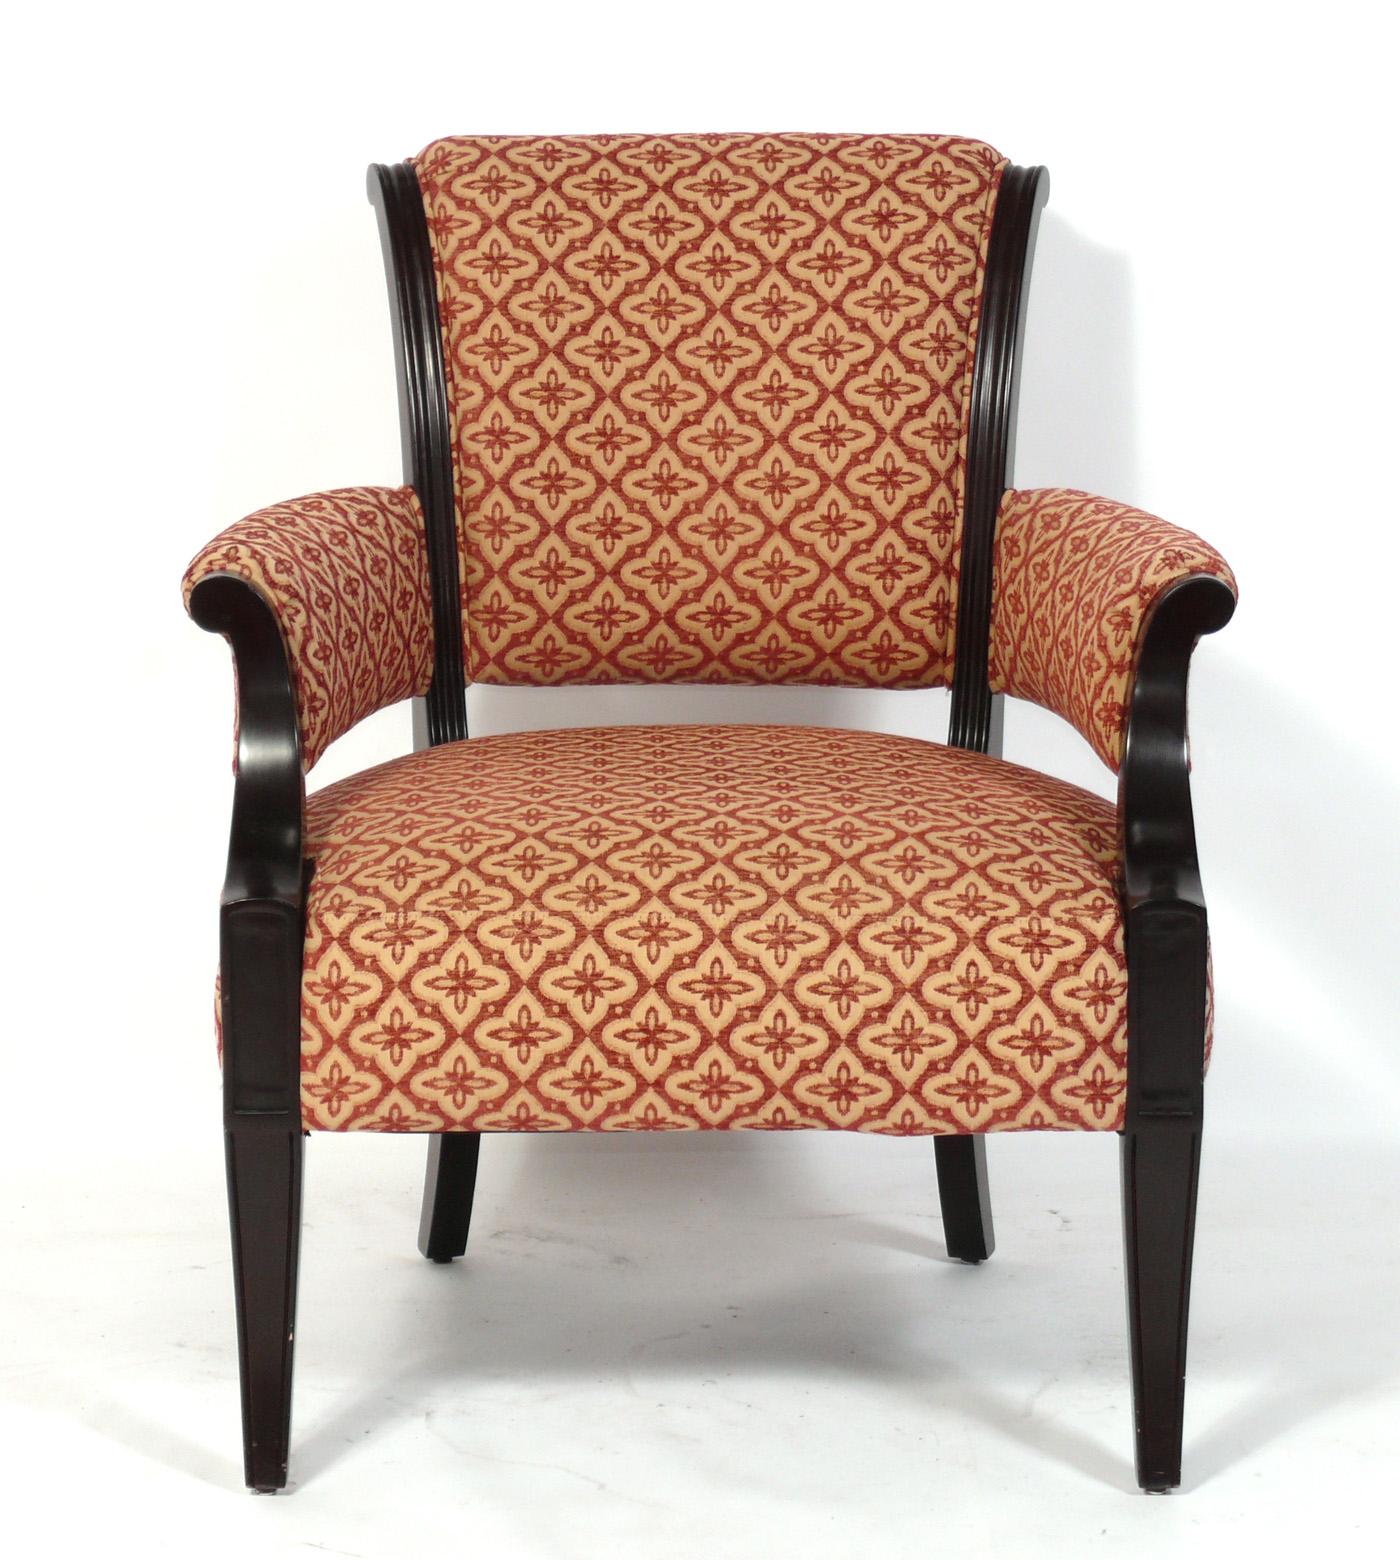 Pair of elegant lounge chairs, designed by Barbara Barry for Baker, American, circa 21st century.